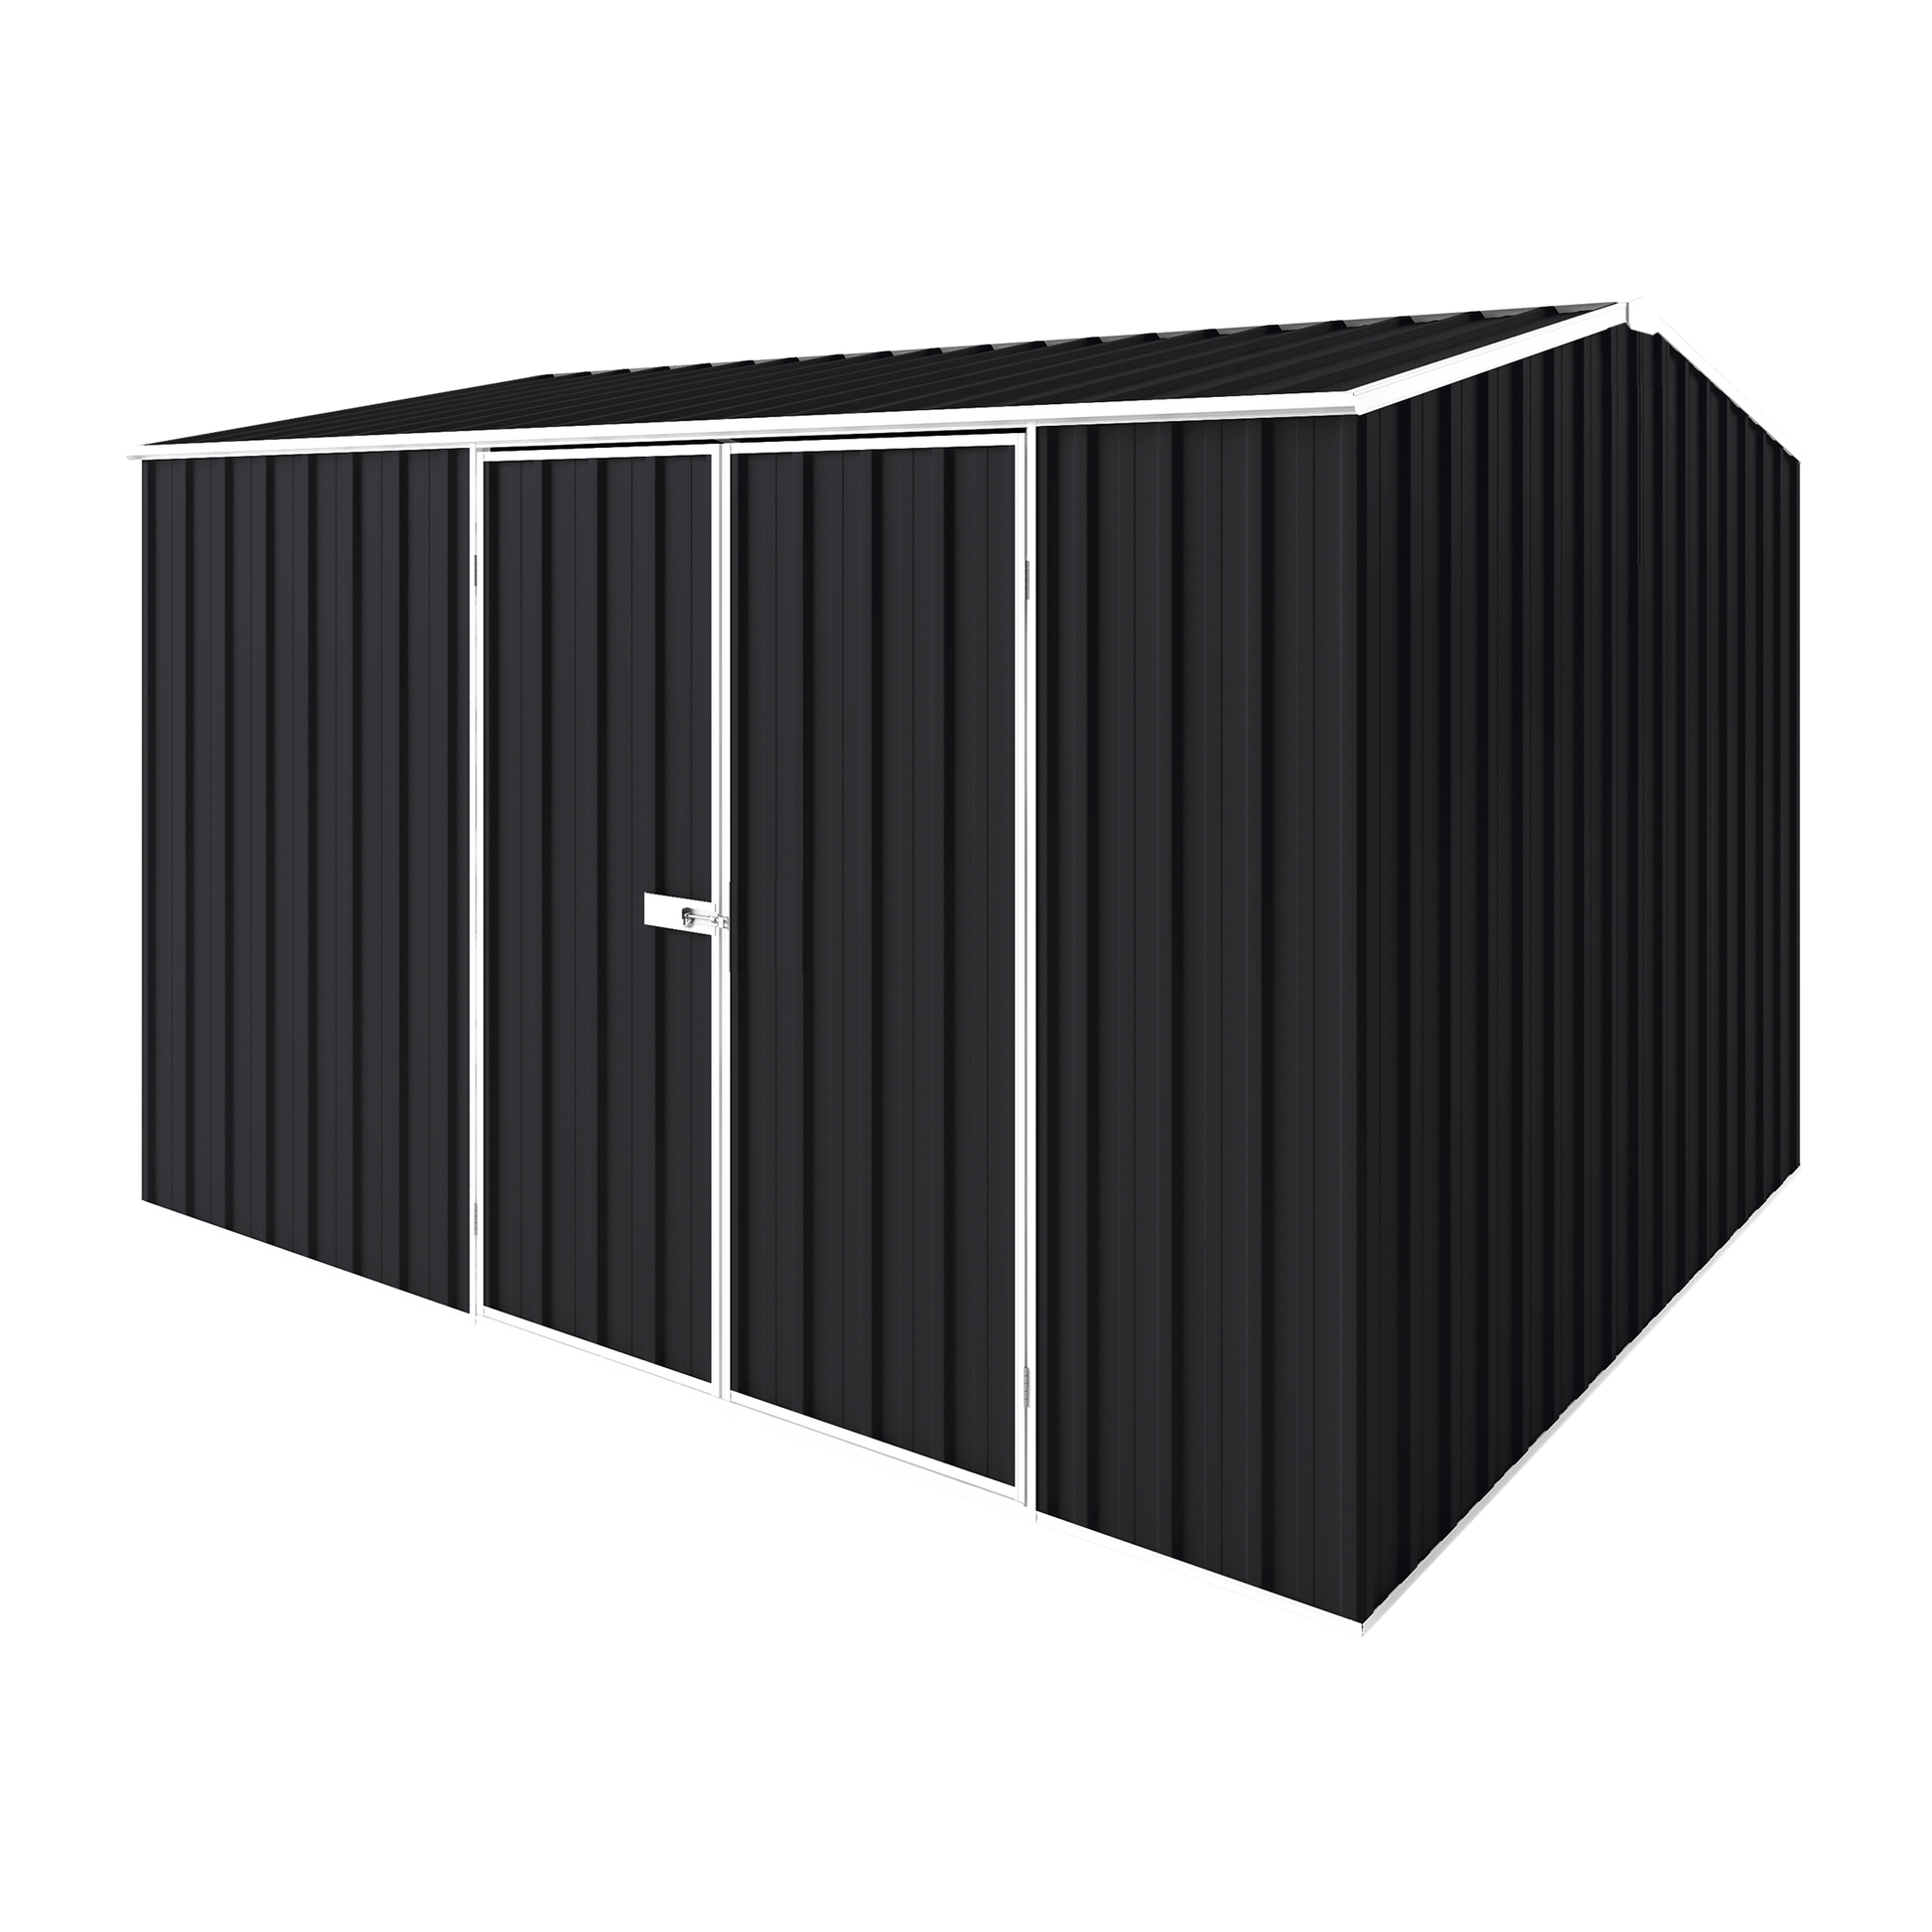 3.75m x 3m Gable Roof Garden Shed - EasyShed